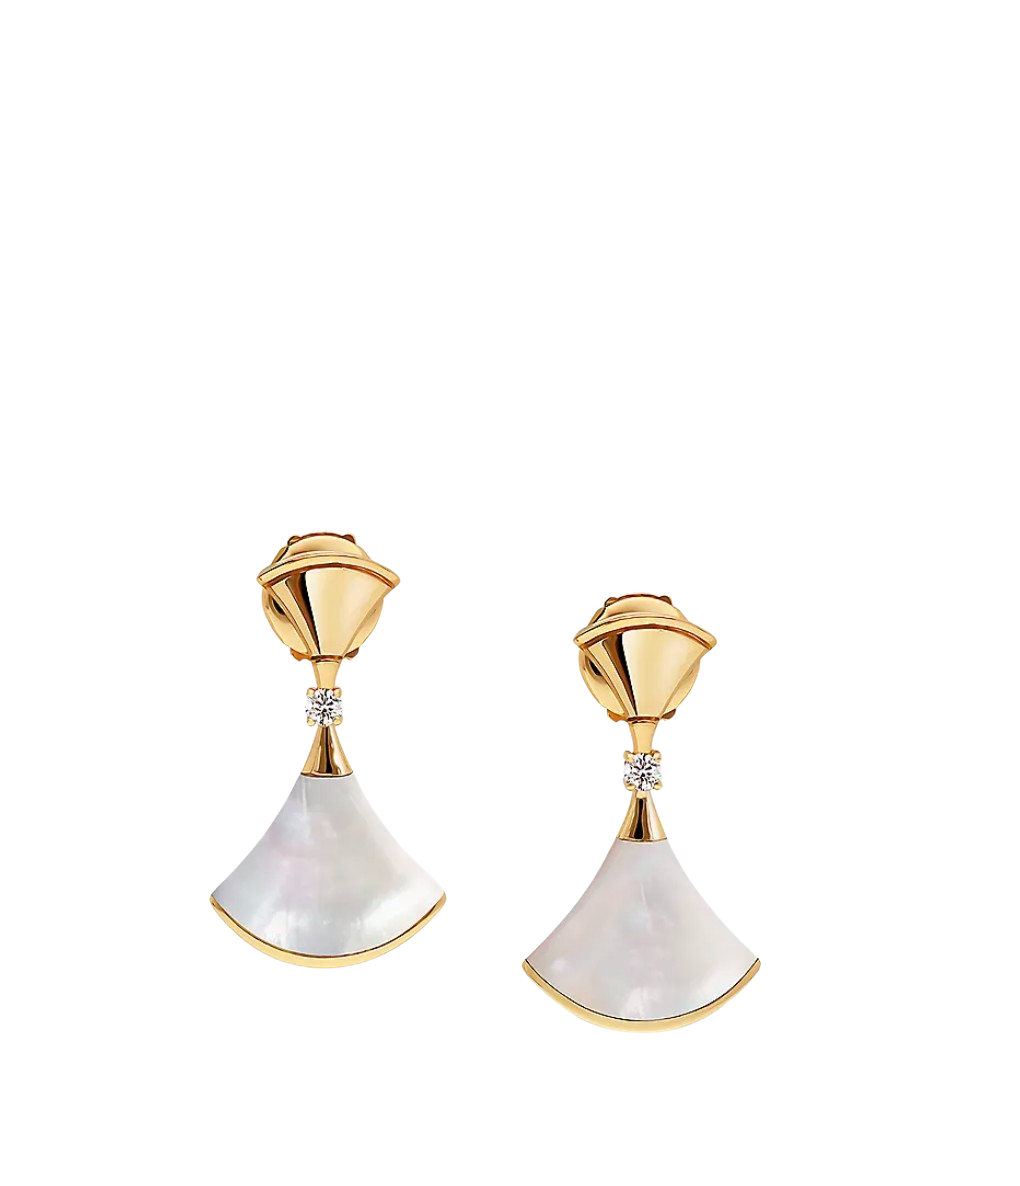 Find the Best Earrings for Your Wedding Dress Neckline